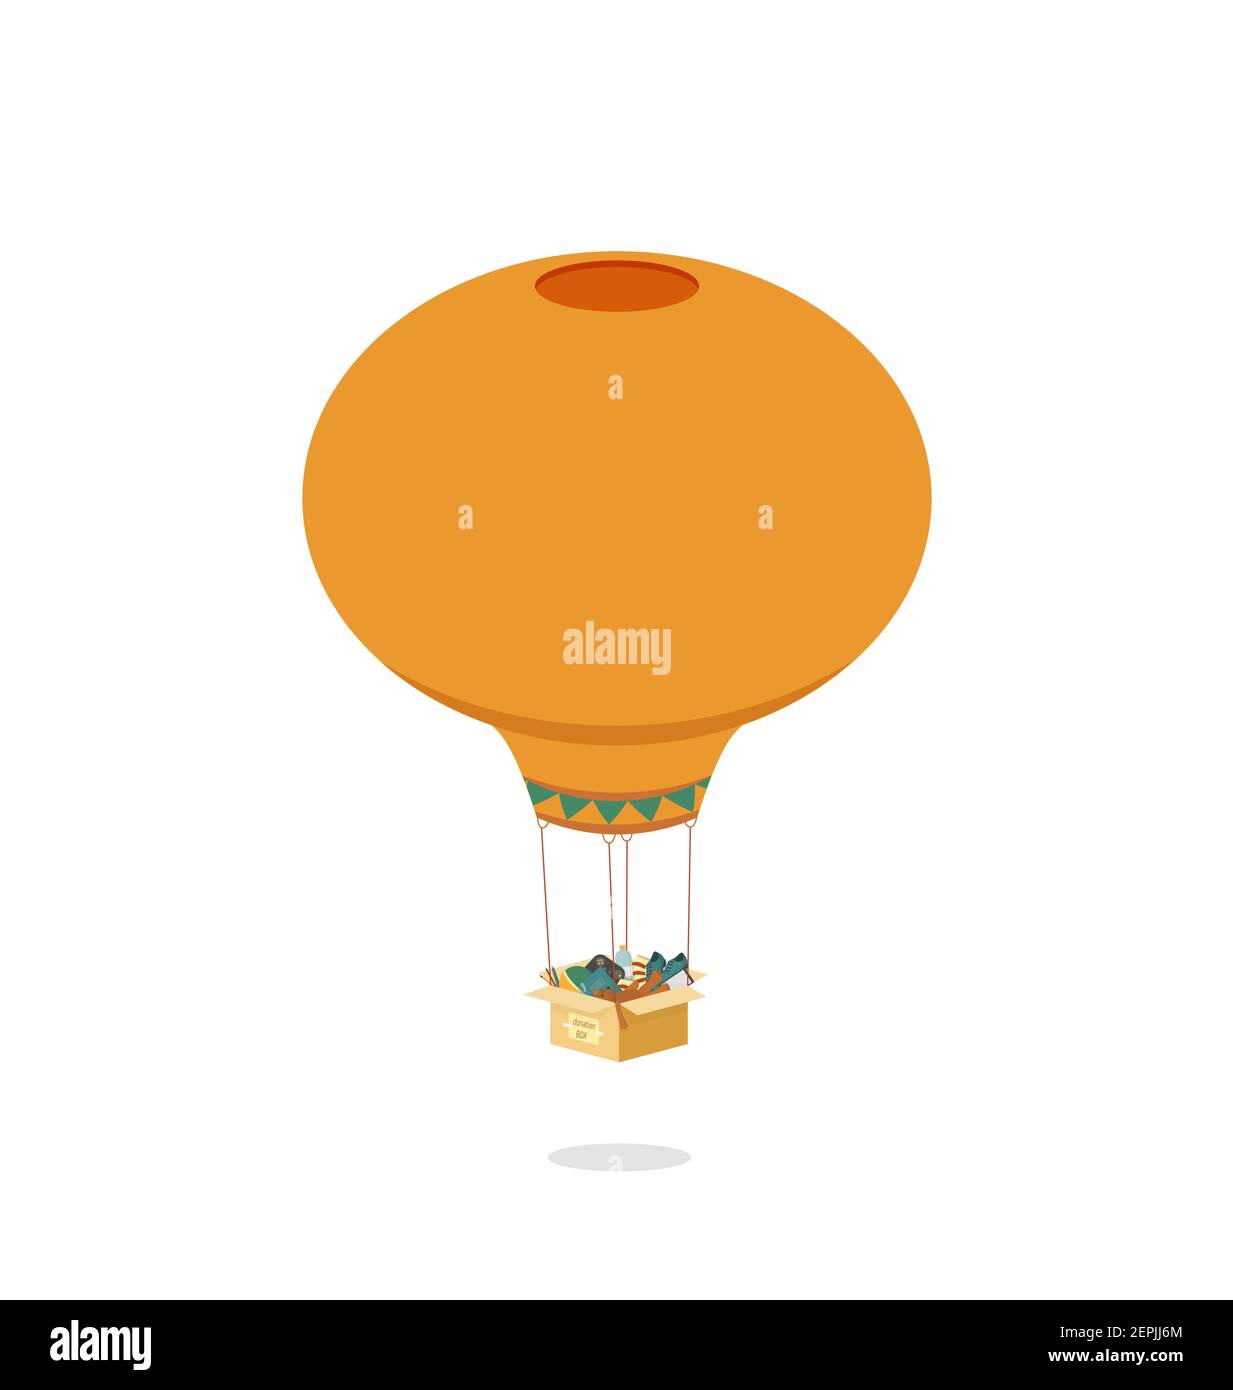 Air balloon attached to donation box. Orange travel charity vehicle carry open box creative travel in free vector flight. Stock Vector